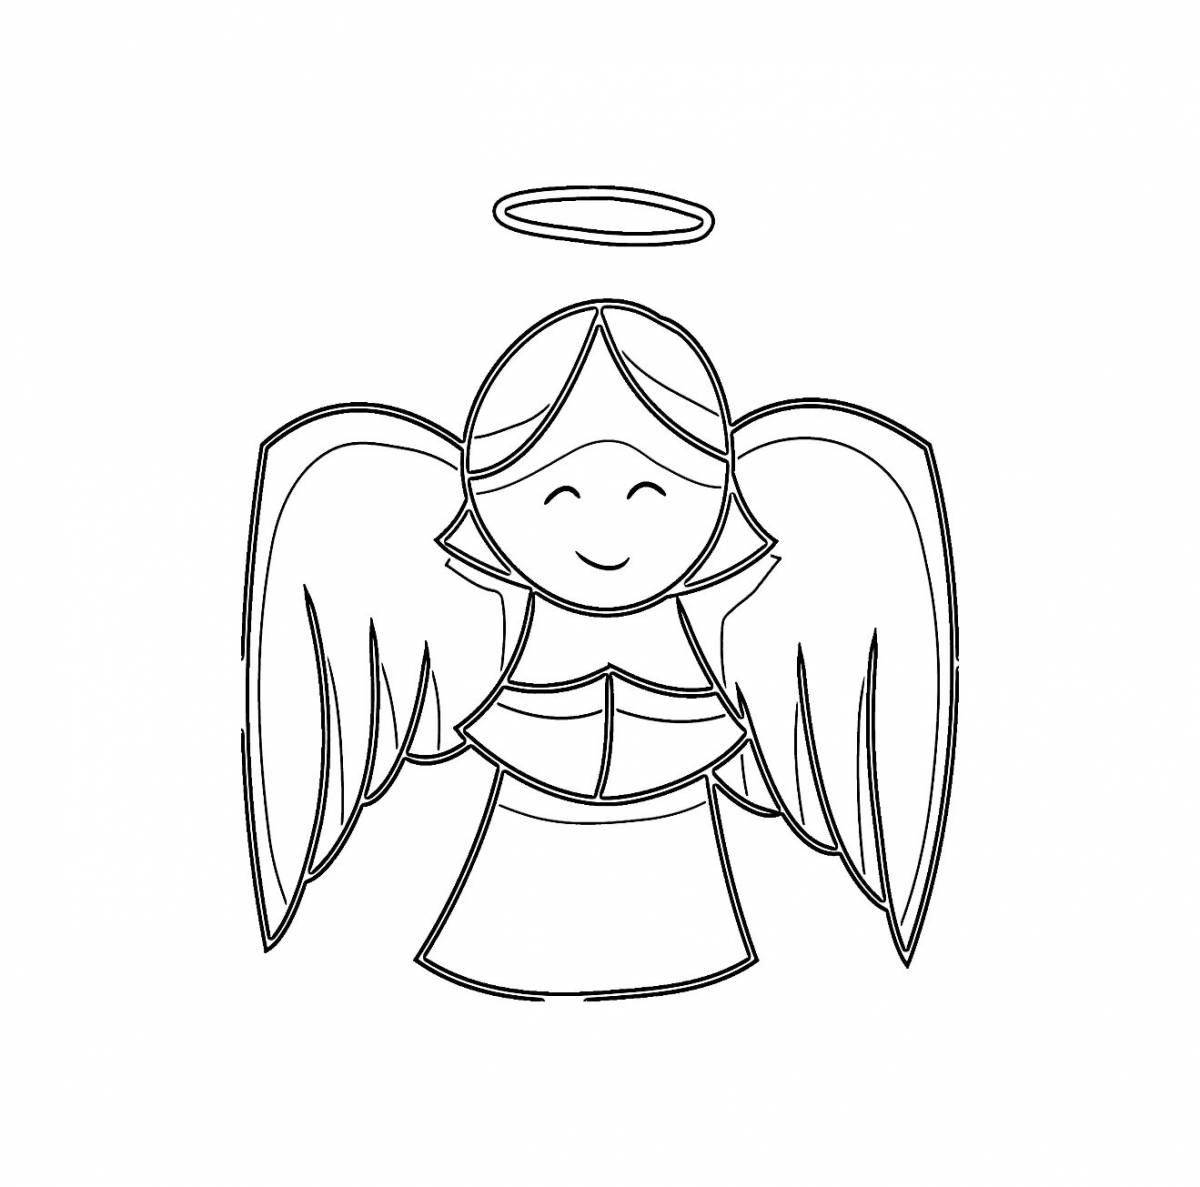 Colouring peaceful little angel